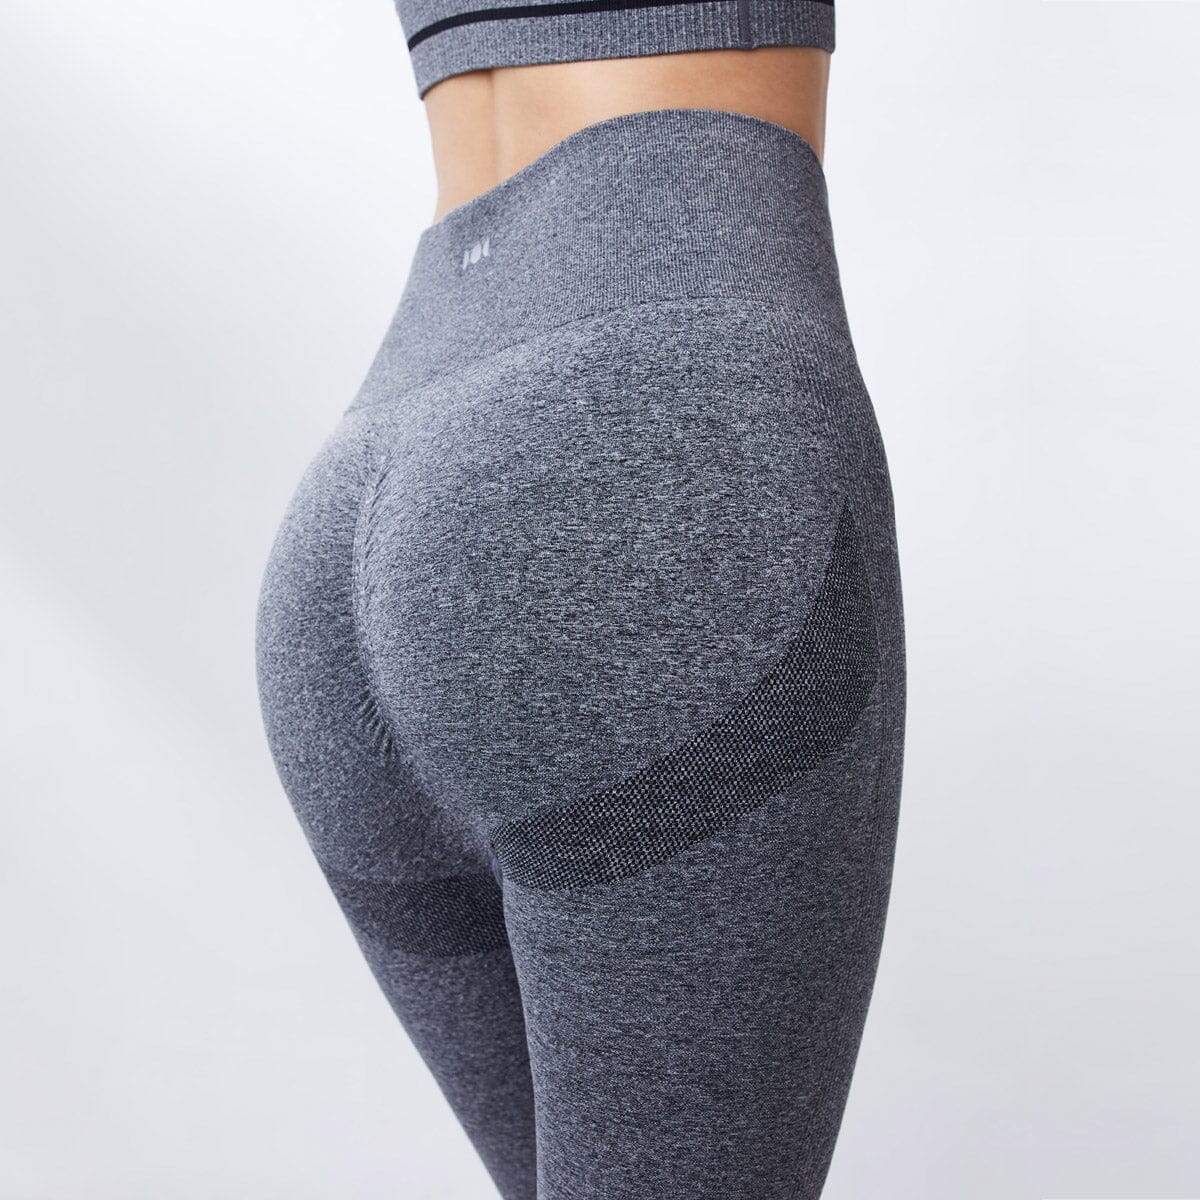 Butt-Sculpting Sustainable Seamless Knit High-Waist Cropped Petite Sports Leggings Leggings Her own words SPORTS Black Heather S 